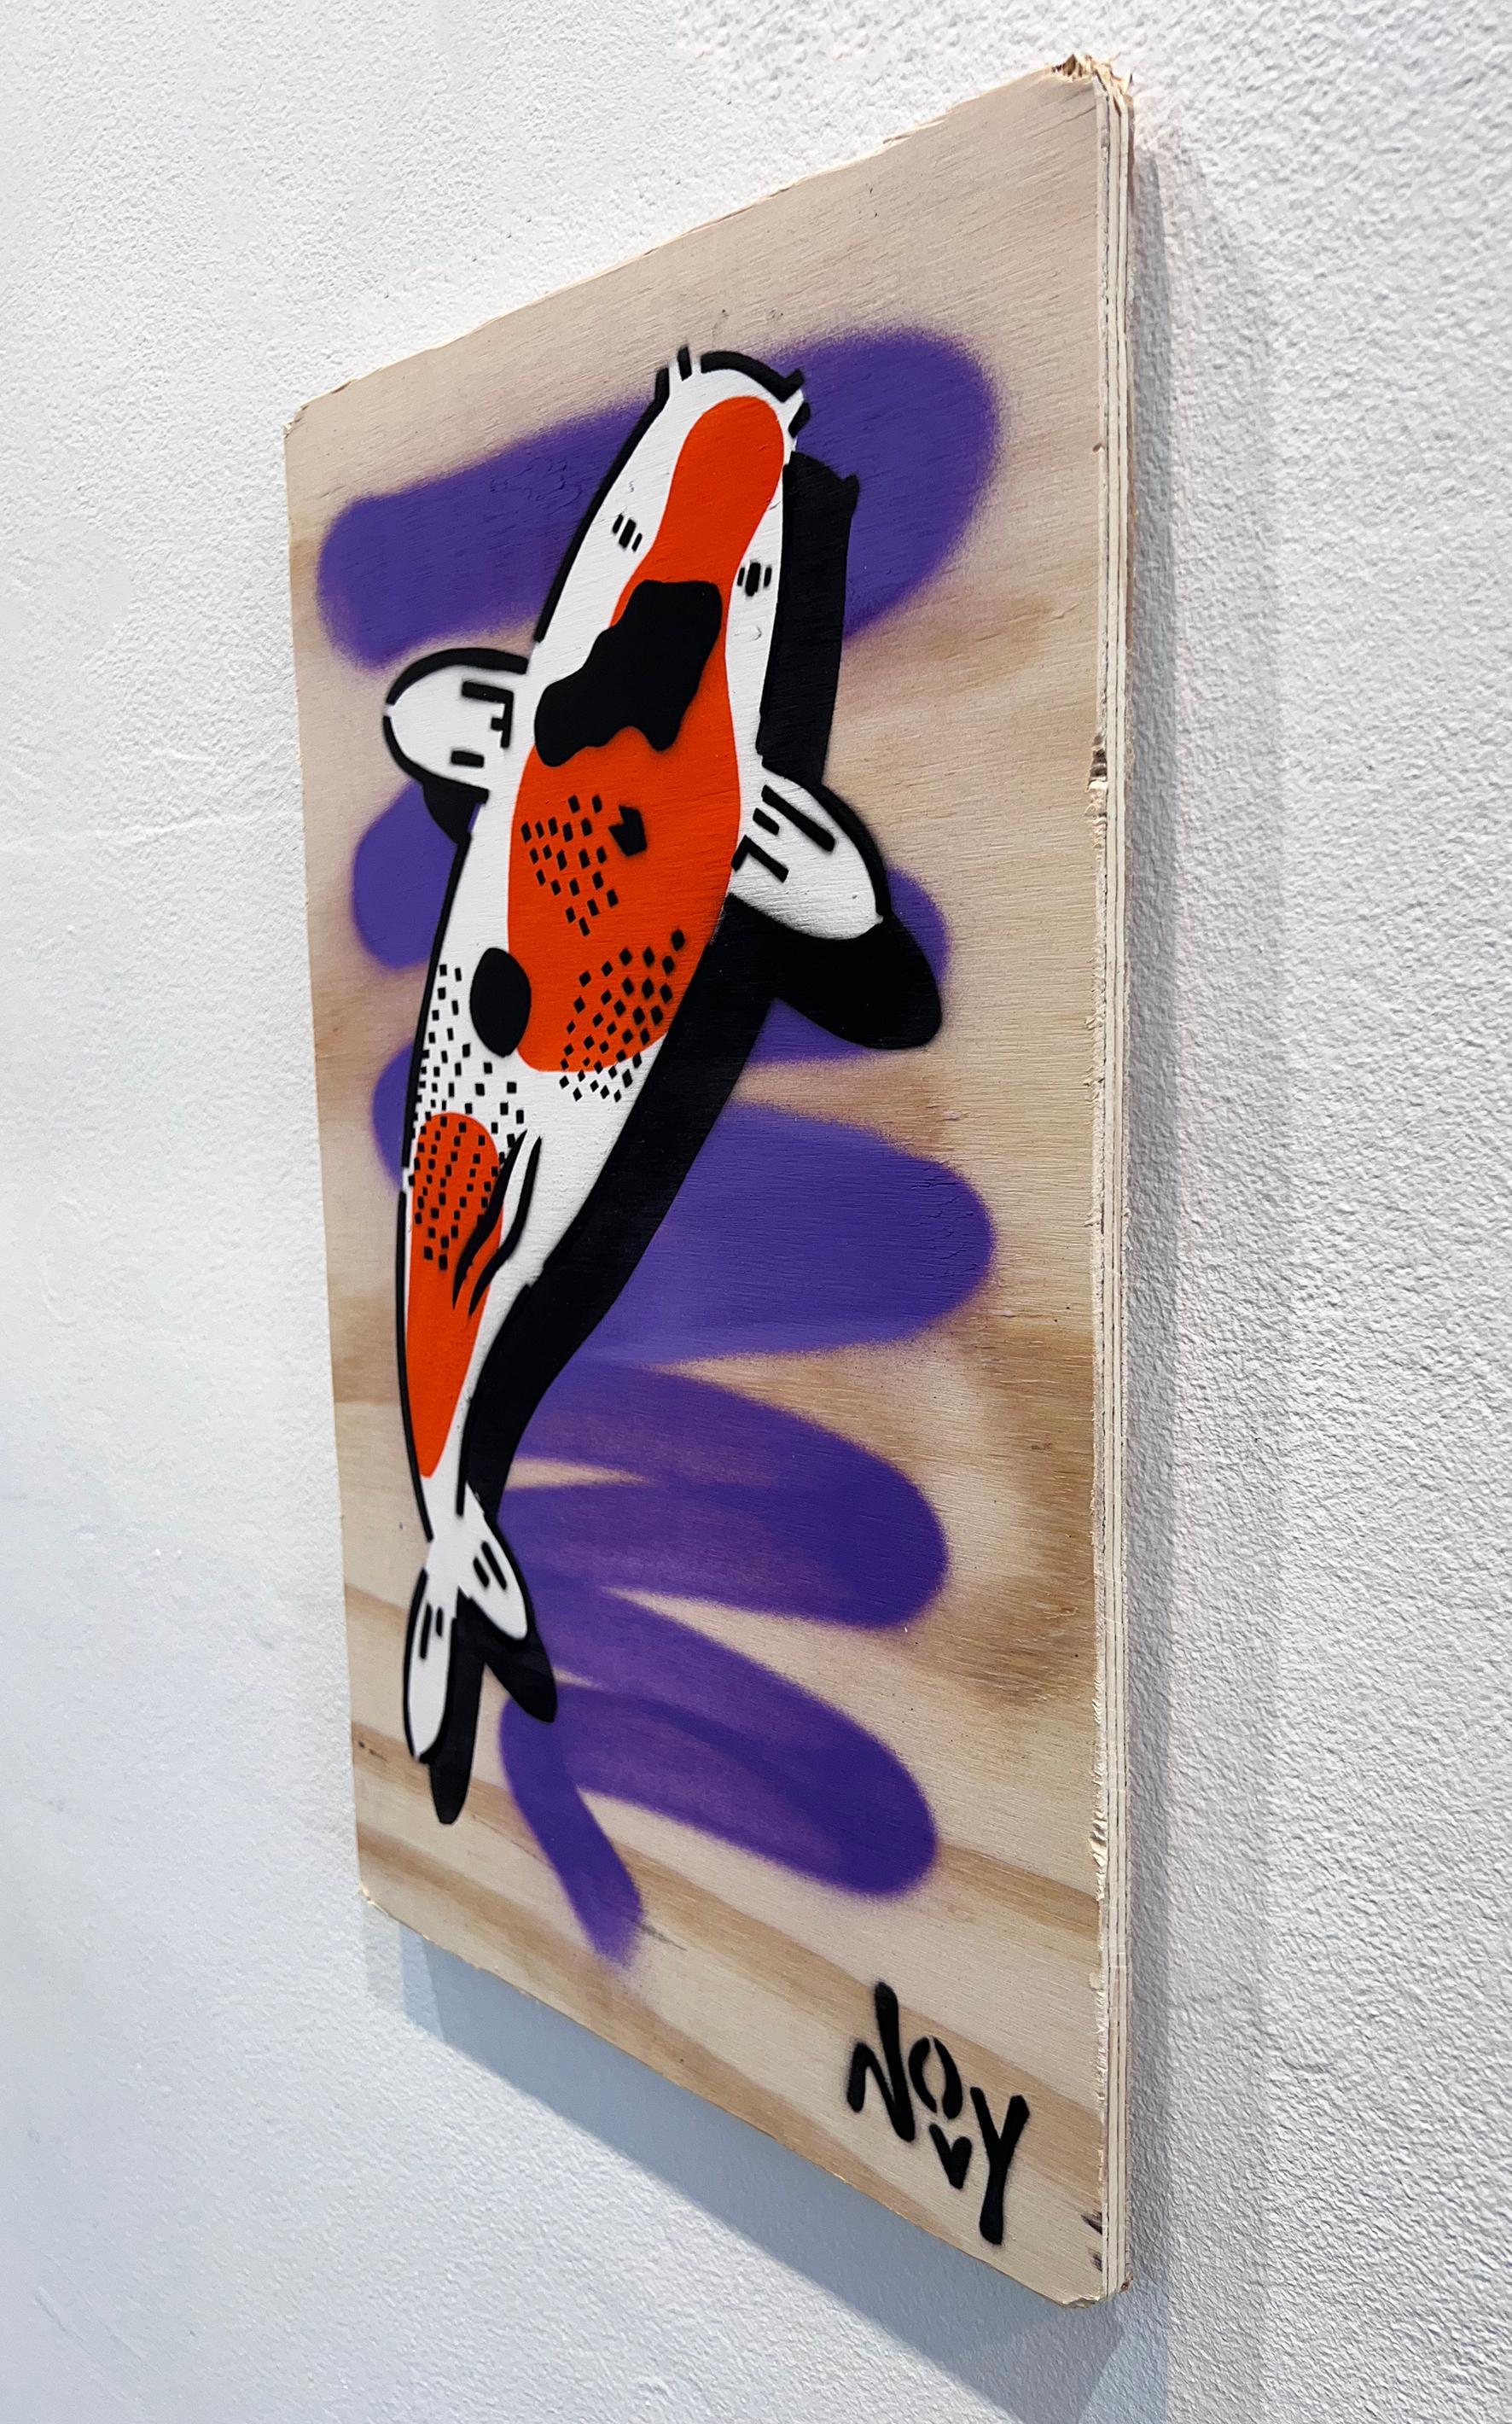 Novy’s most-established series of koi fish references propaganda posters and anti-authoritarian symbols in Chinese art under communism. Koi traditionally symbolize the lessons and trials people often encounter in life and, as koi are able to swim